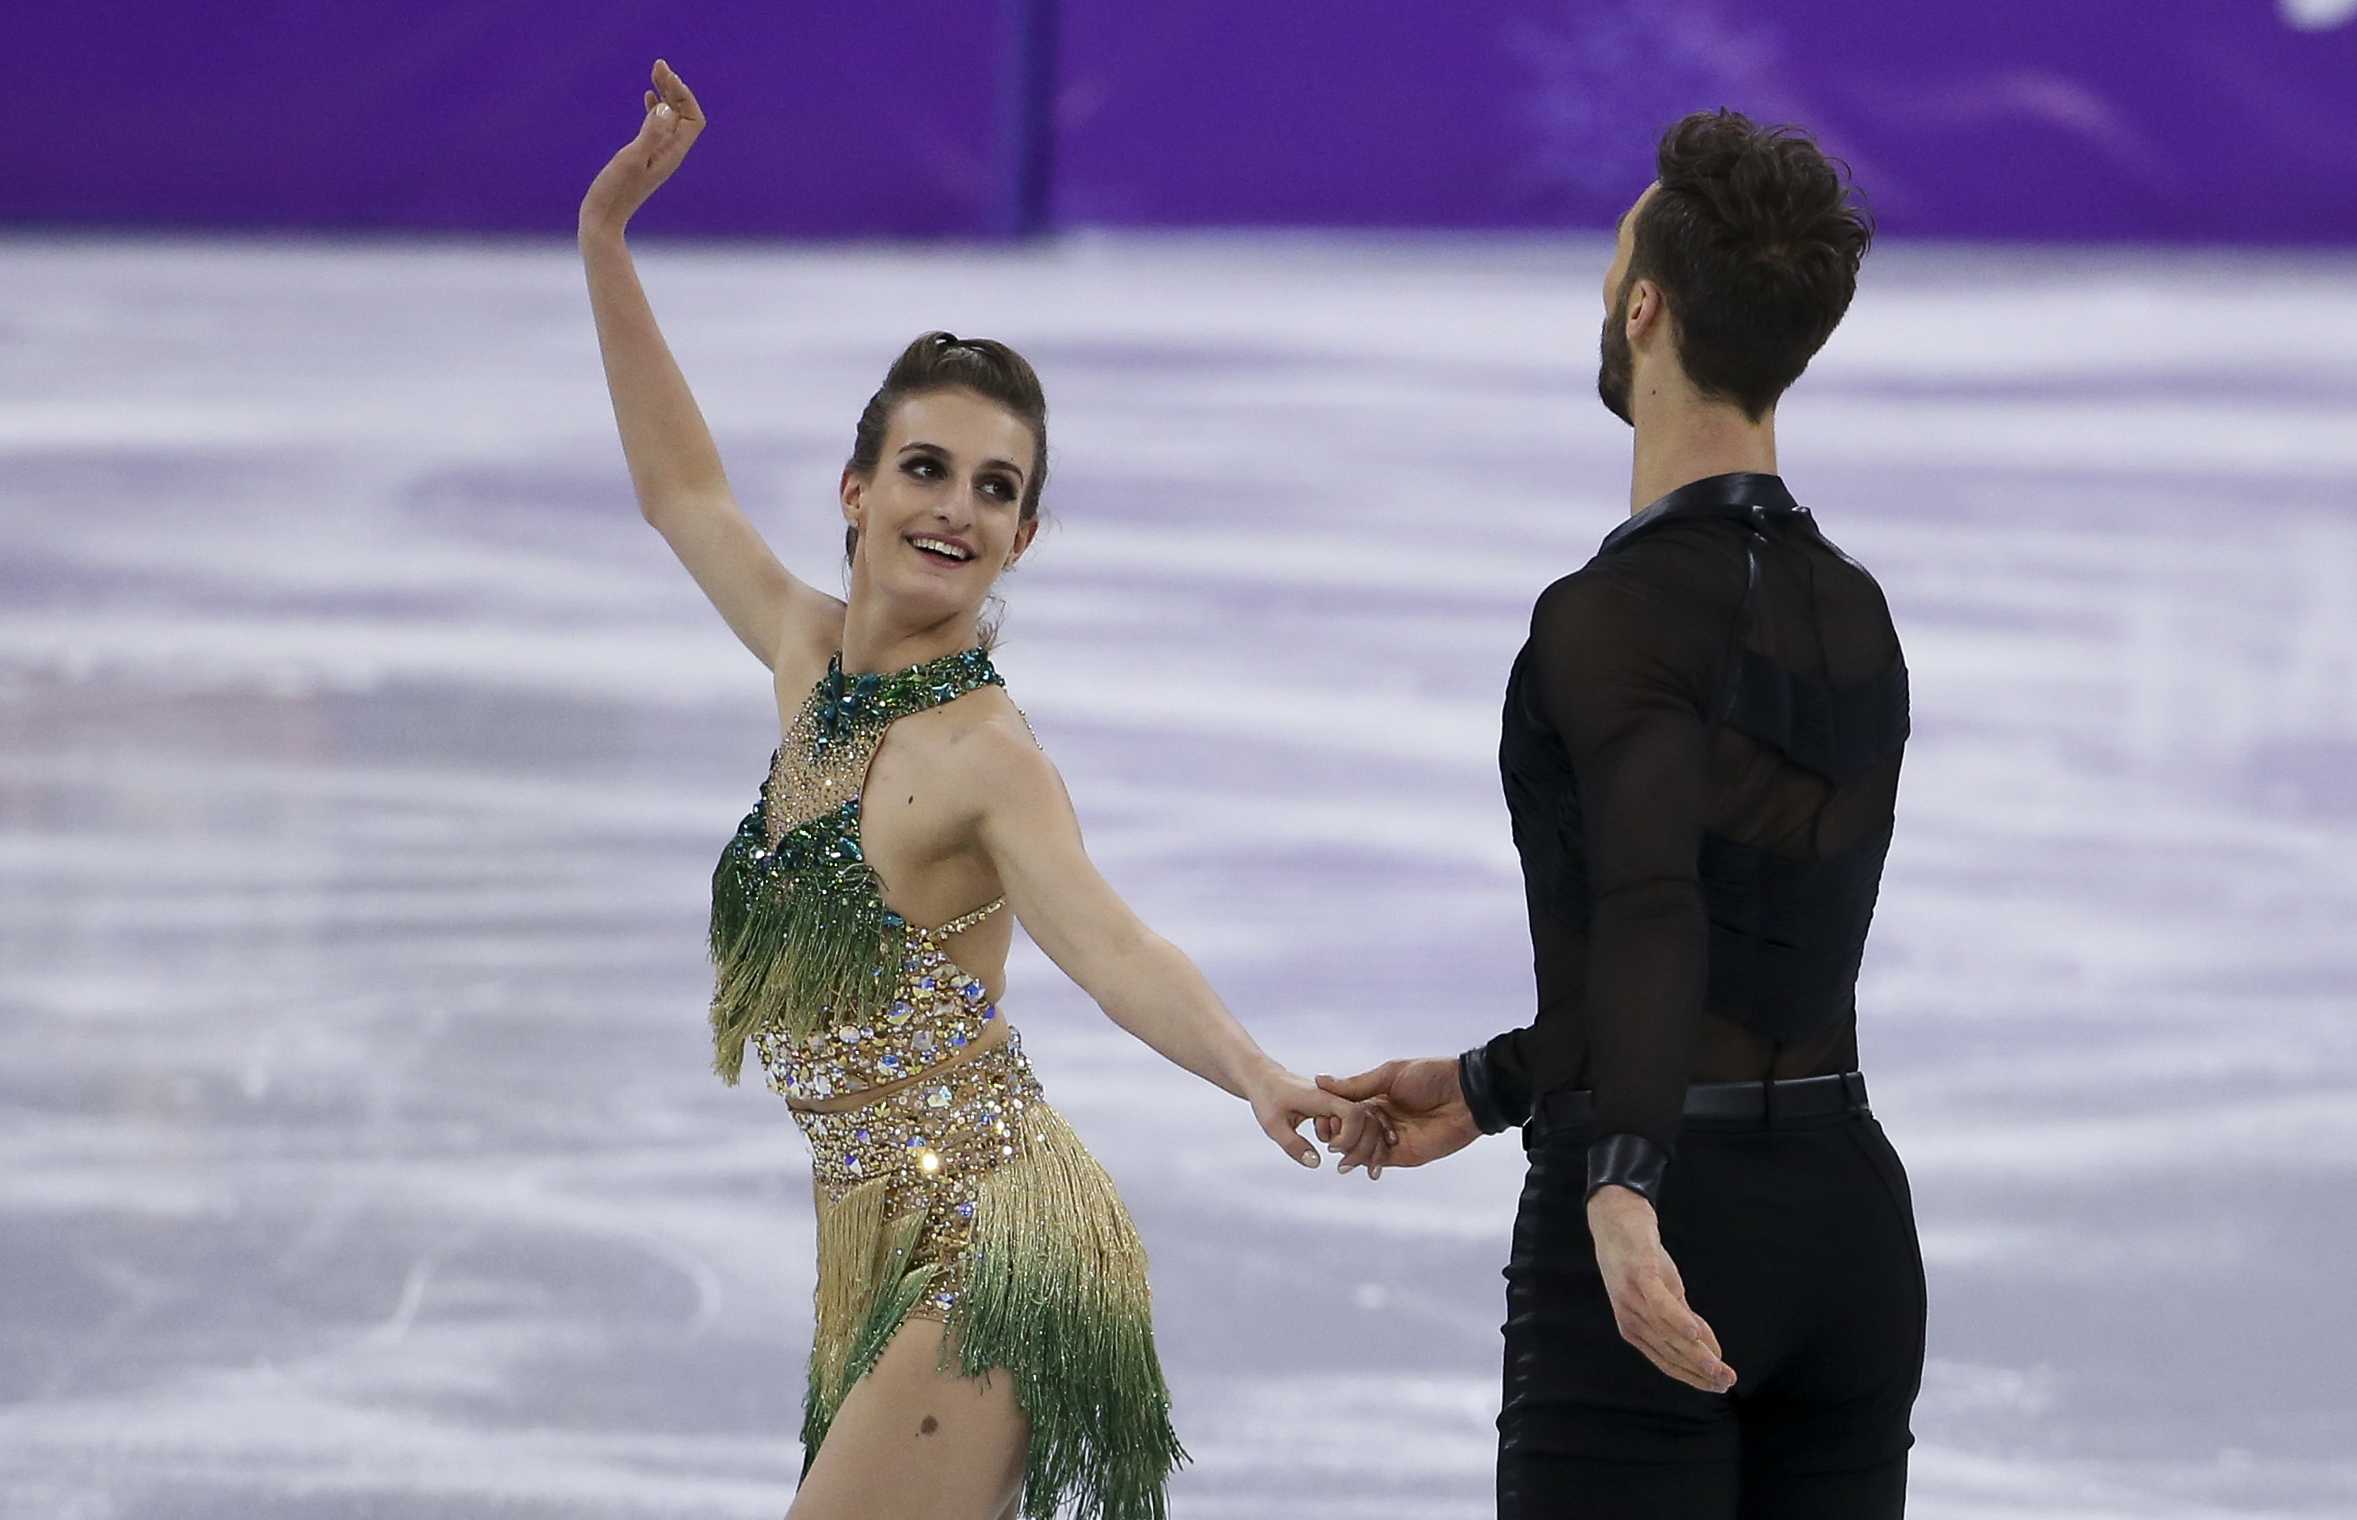 Wardrobe malfunction leaves French ice dancer exposed during Olympic performance